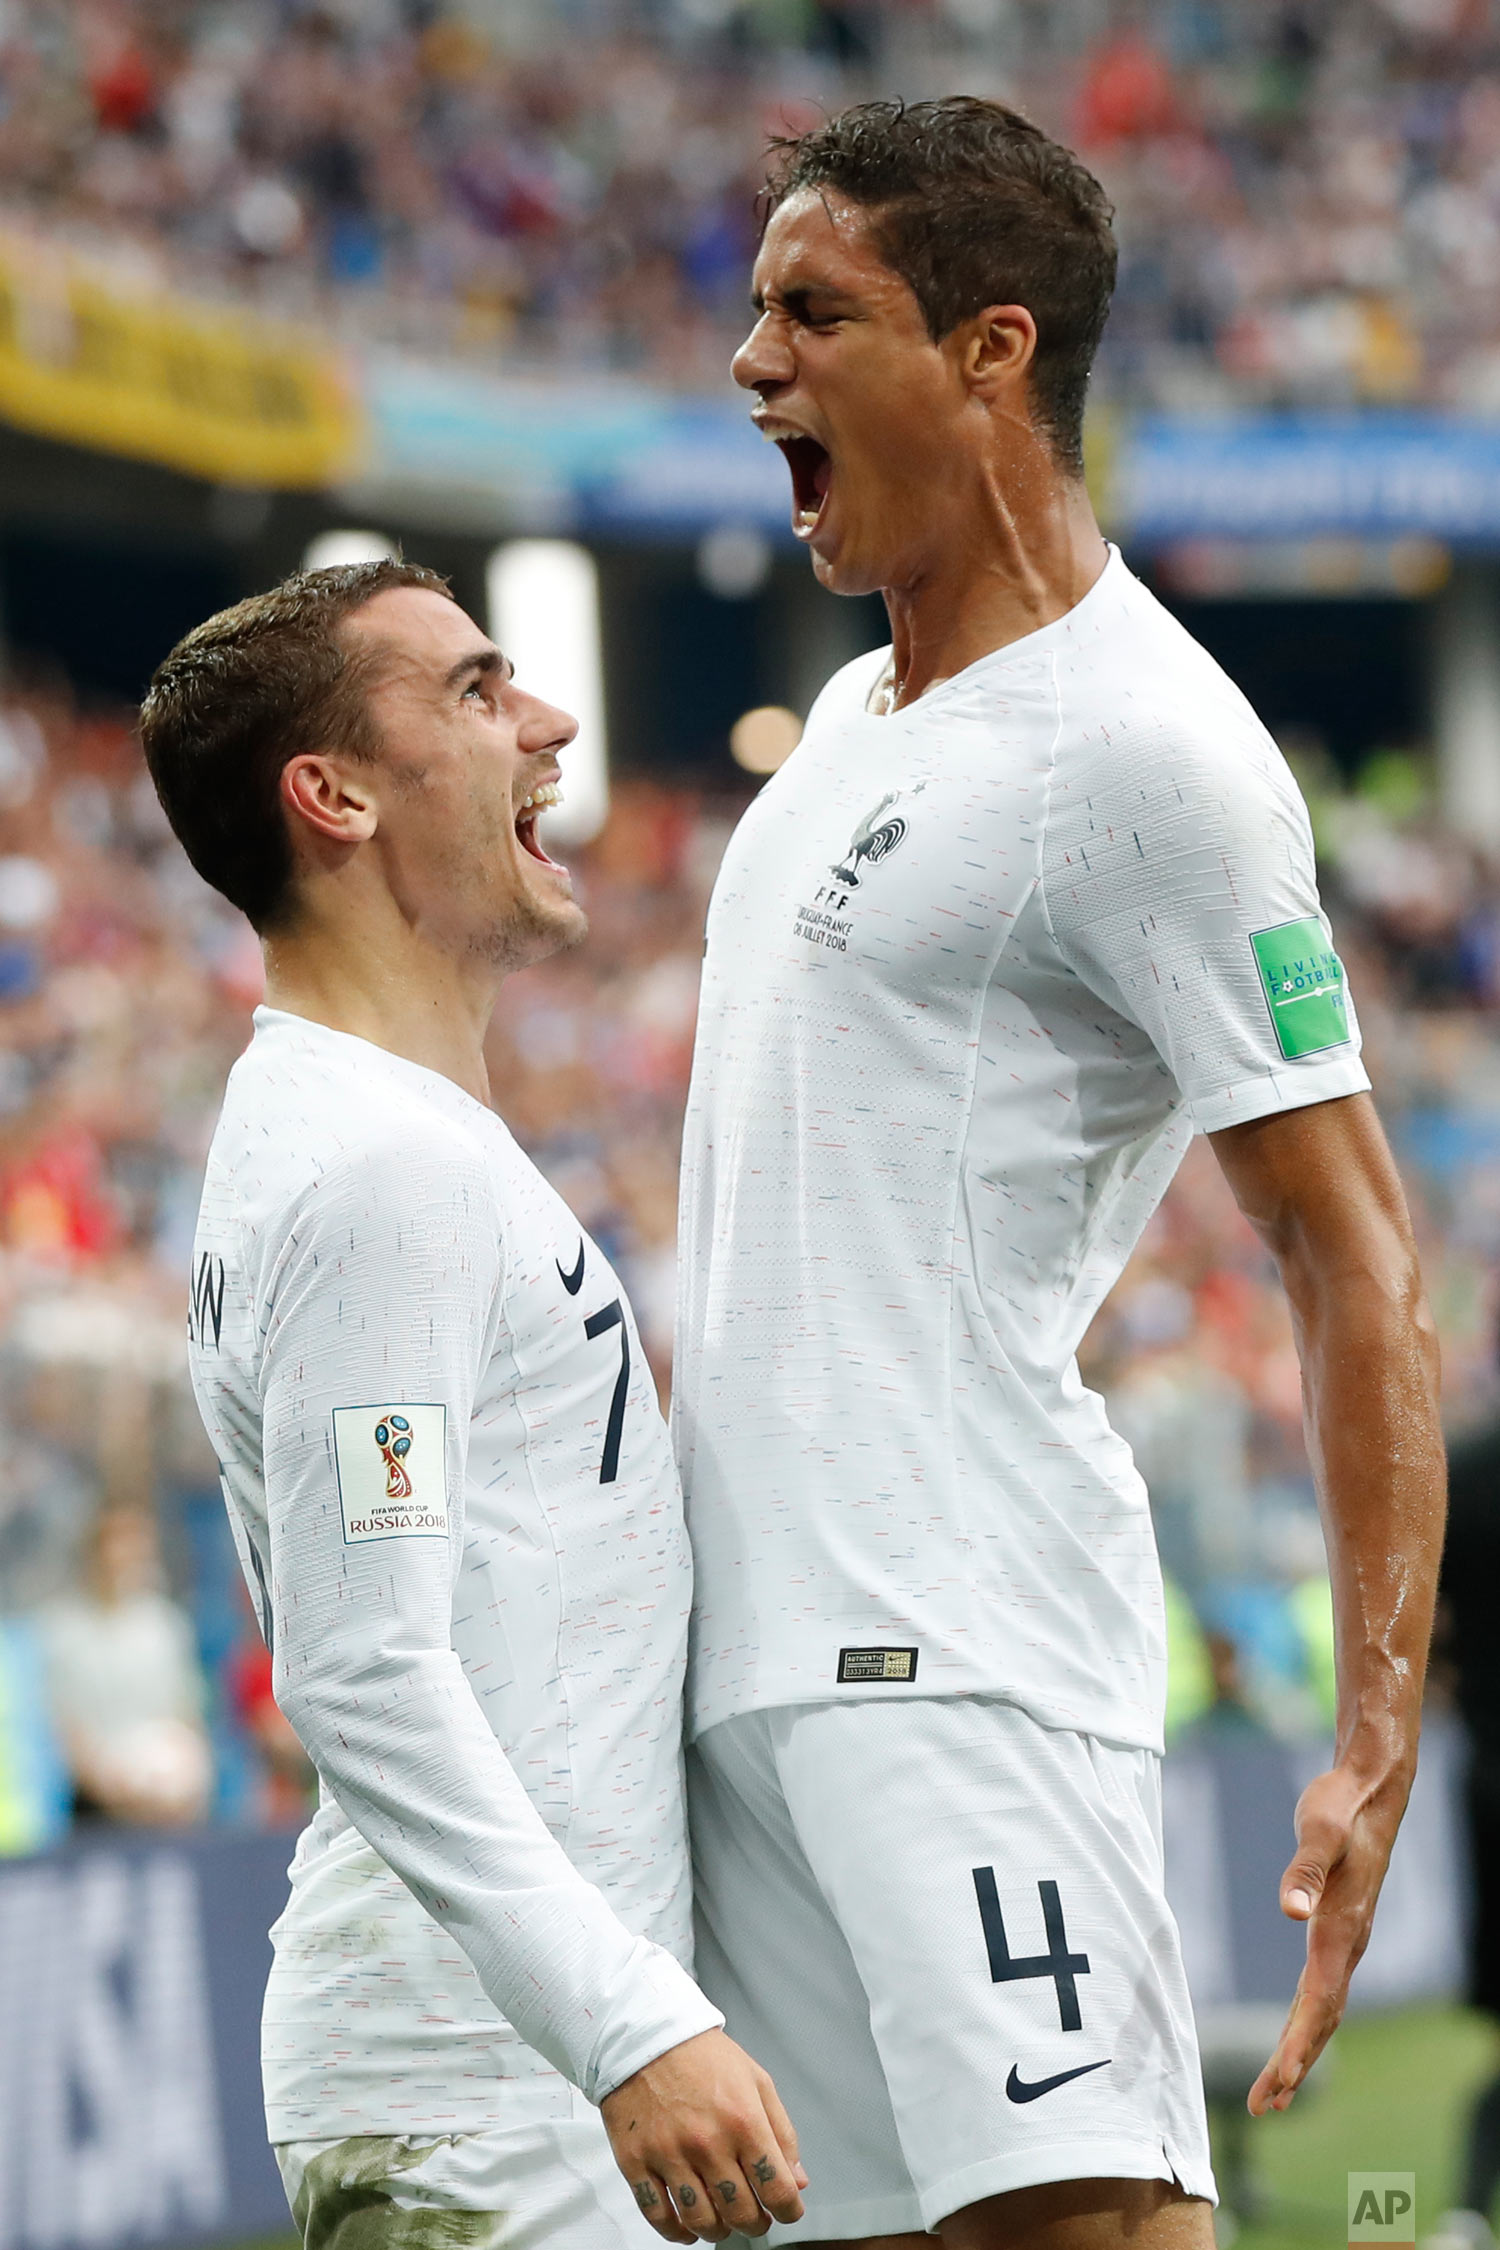  France's Raphael Varane, right, and Antoine Griezmann celebrate after Varane scored his side's first goal during the quarterfinal match between Uruguay and France at the 2018 soccer World Cup in the Nizhny Novgorod Stadium, in Nizhny Novgorod, Russi